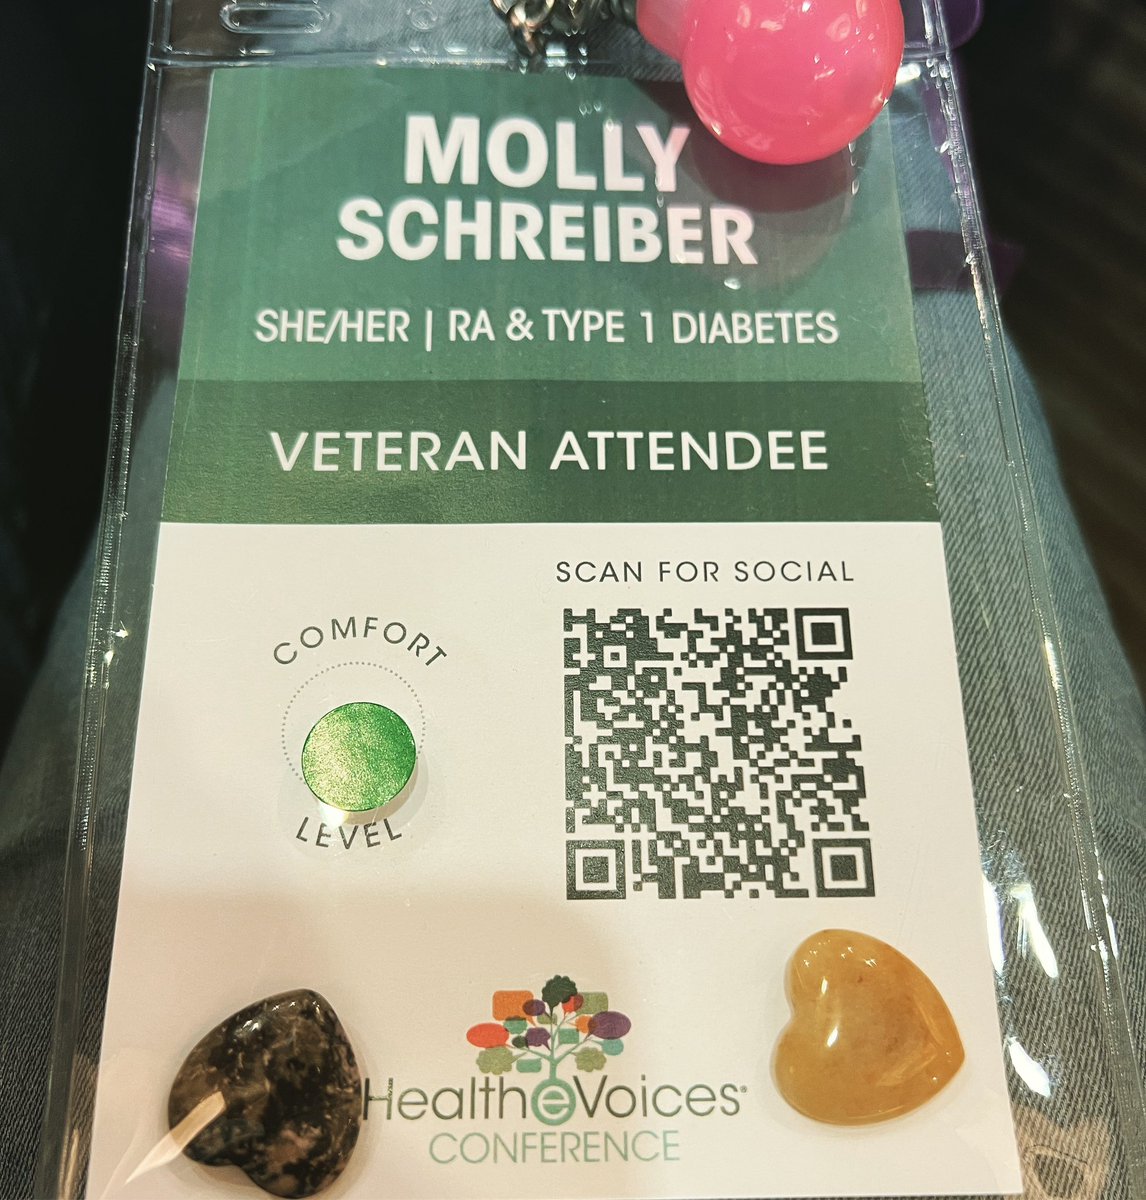 So excited to be at @healthevoices in Philly this weekend! Just a reminder: Janssen paid for my travel expenses to attend HealtheVoices. All thoughts and opinions expressed here are my own. #HealtheVoices22